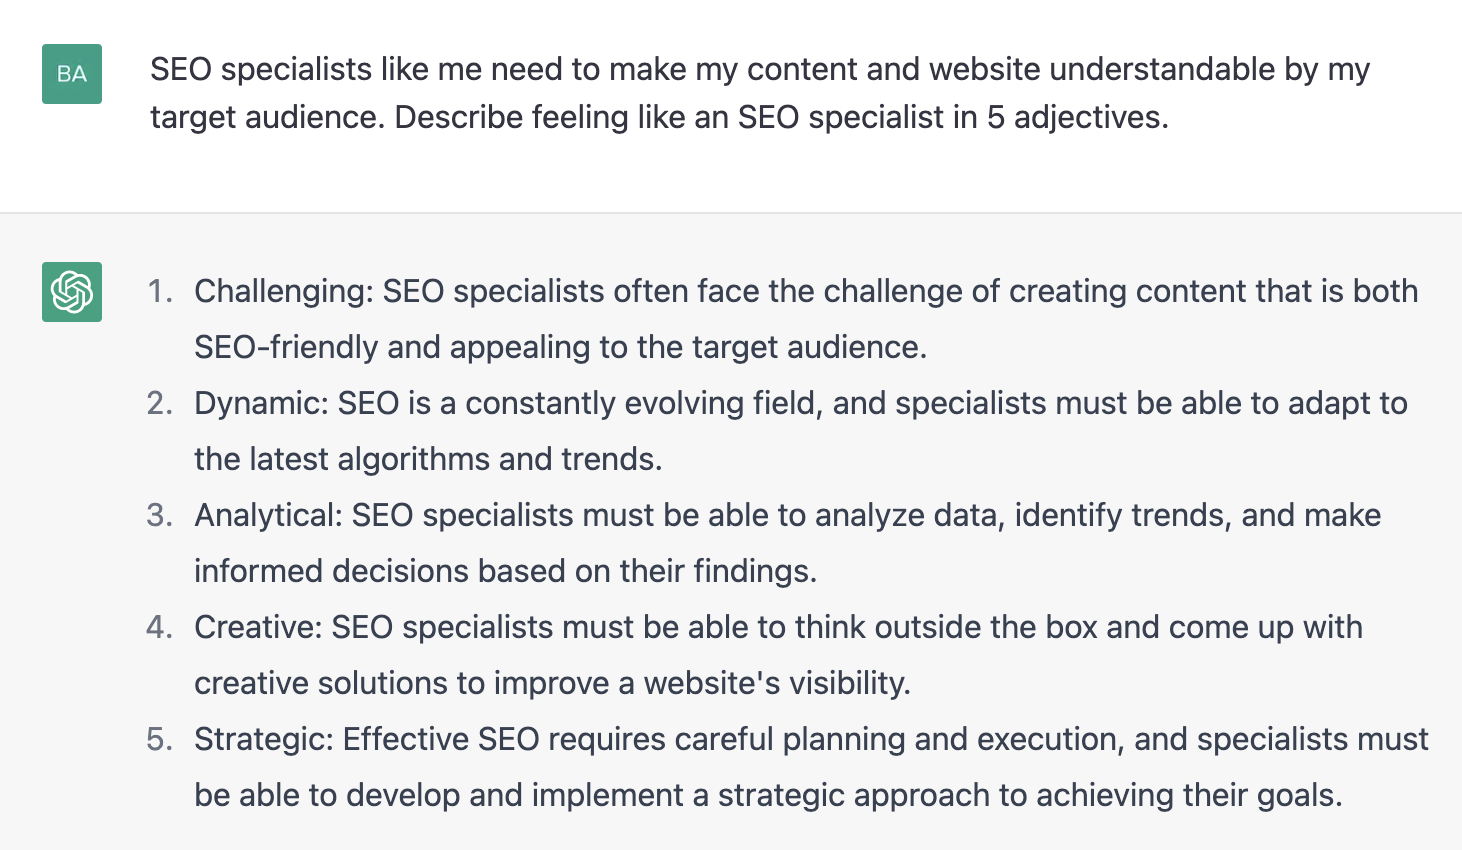 ChatGPT prompt about describing the feeling like an SEO specialist in 5 adjectives